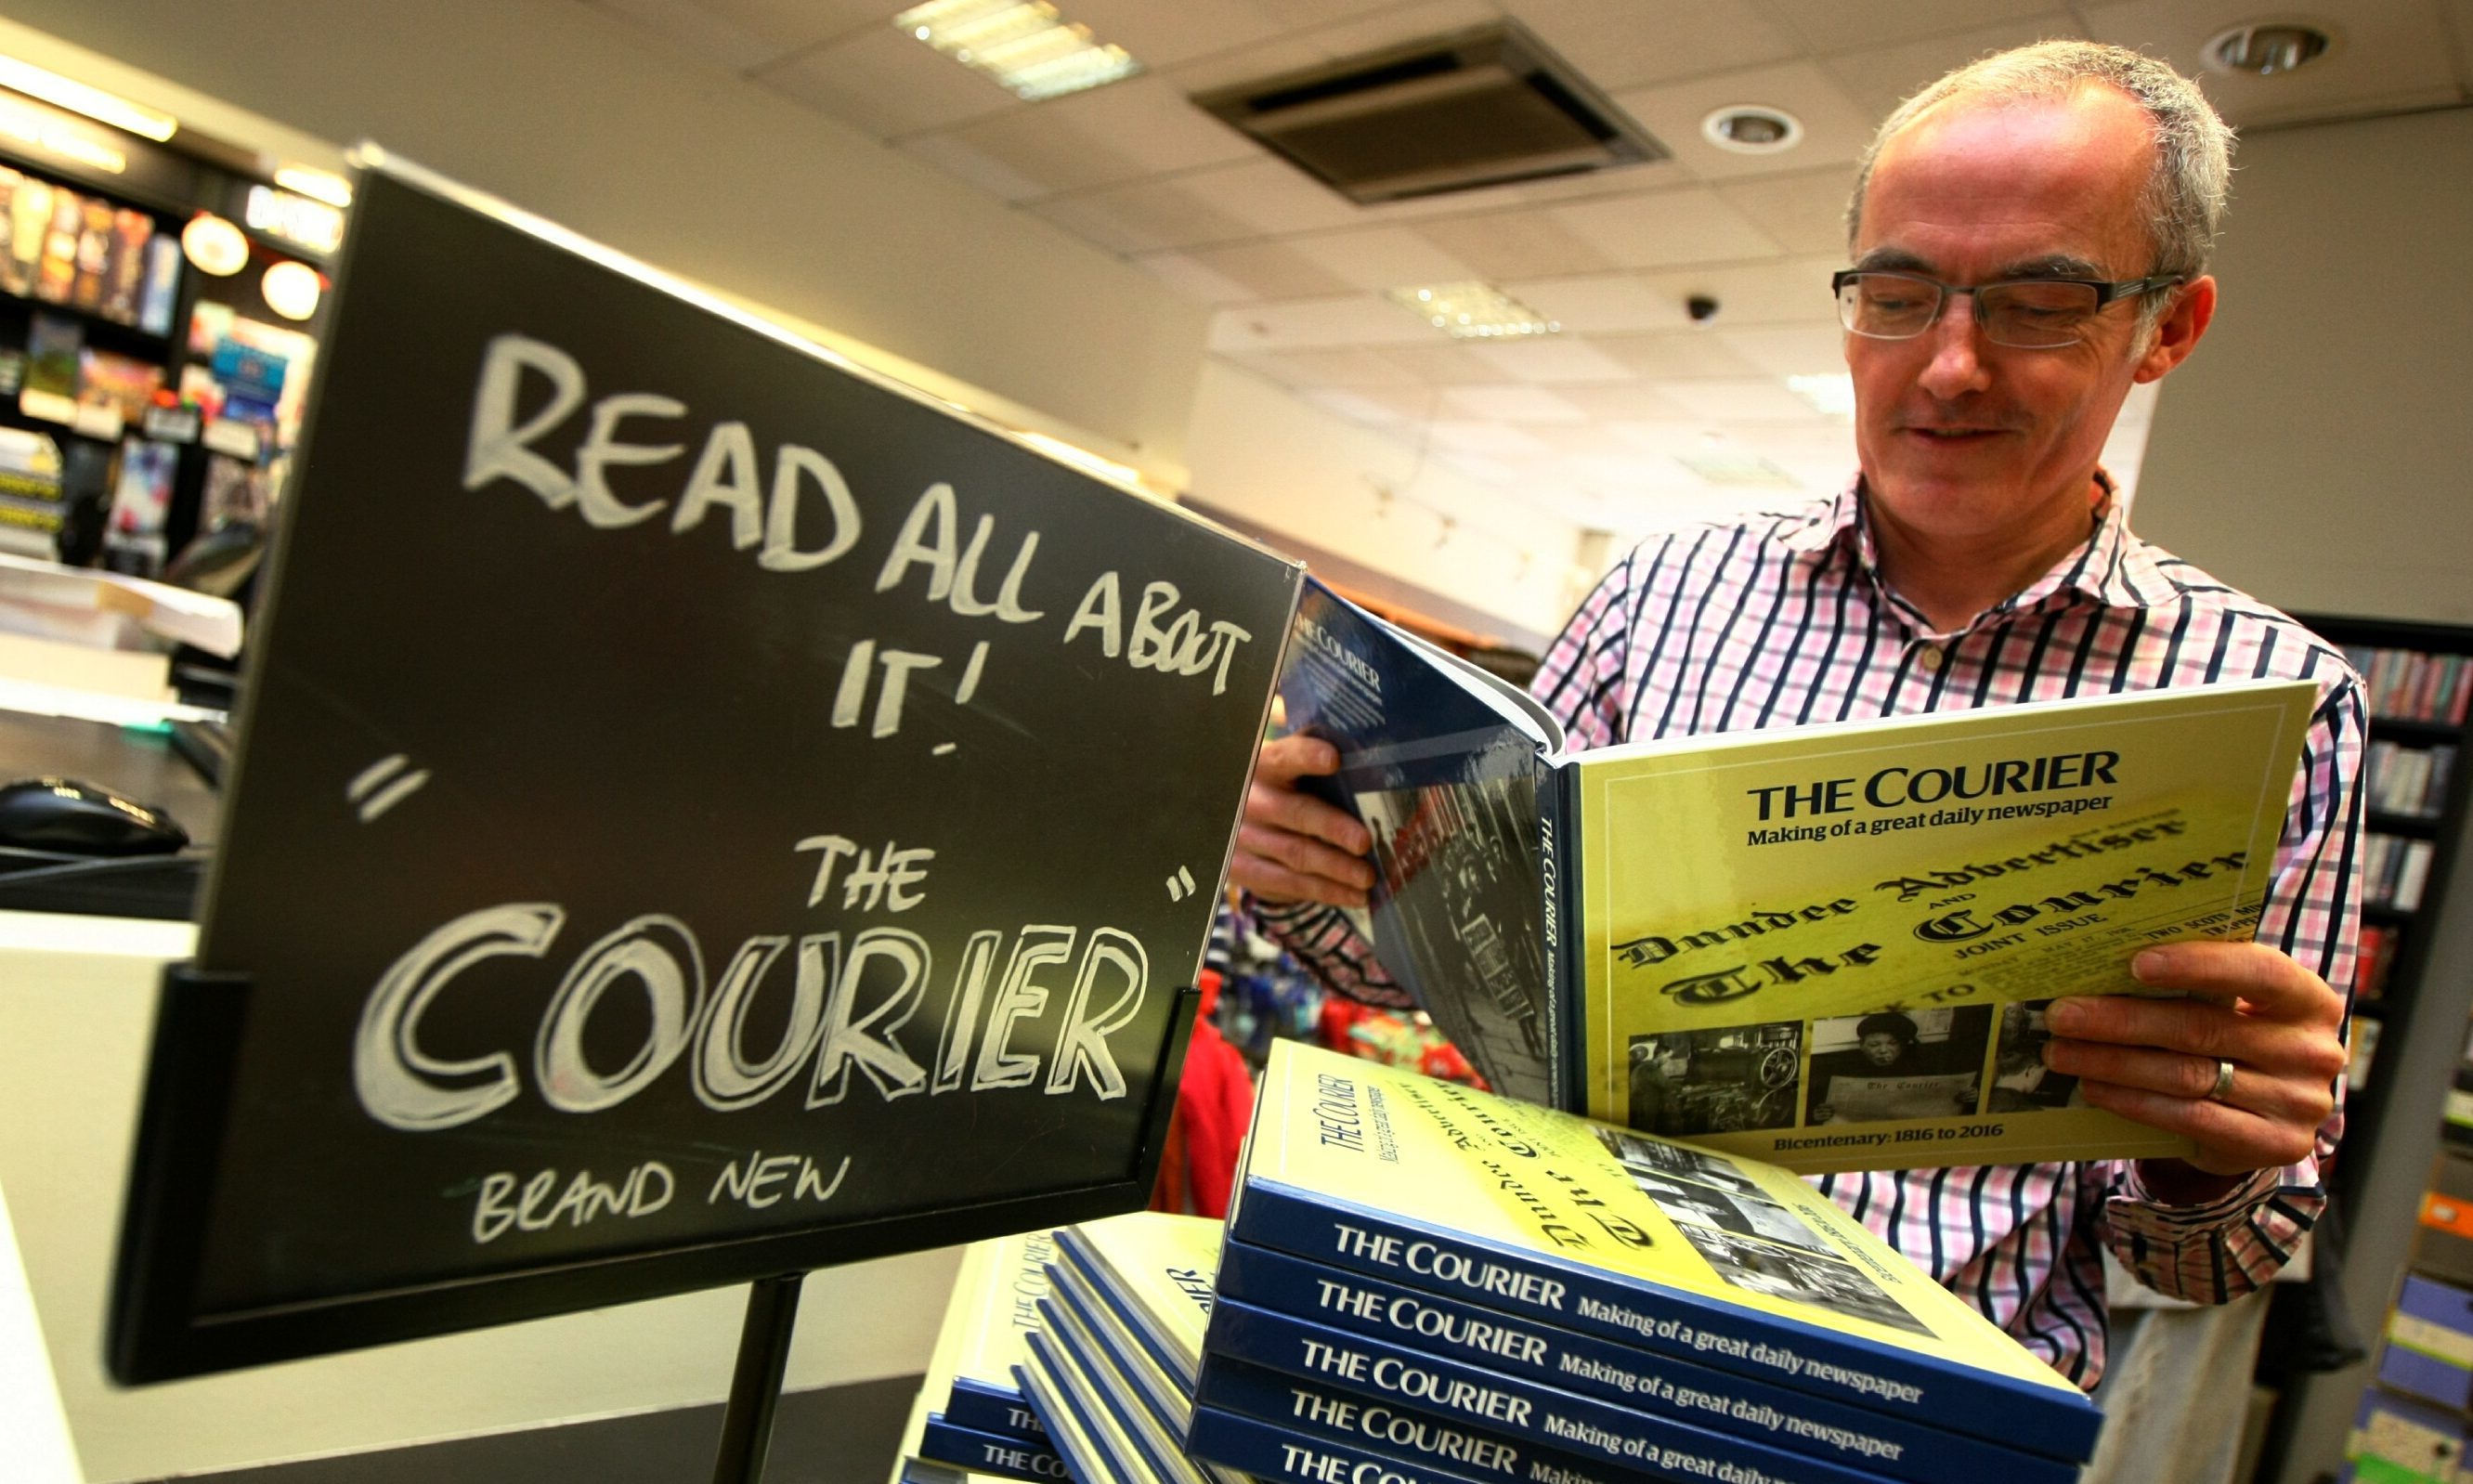 Waterstone's Dundee manager Kevin Breen with the new book on The Courier.